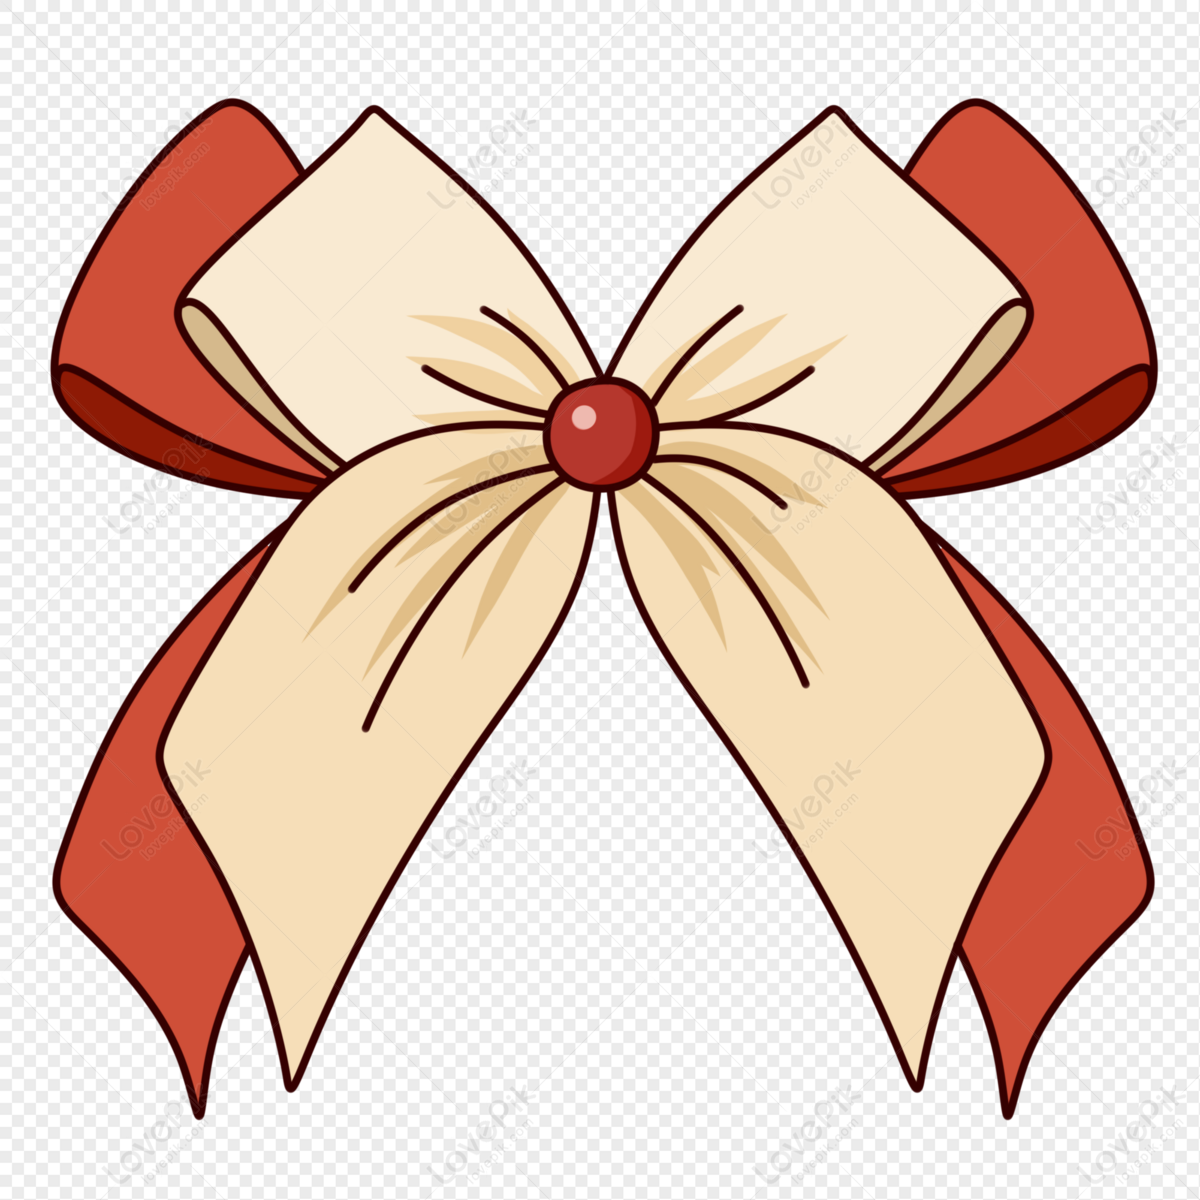 Cartoon Hand Drawn Bow, Light Red, Bow Vector, Bow Red PNG Image And